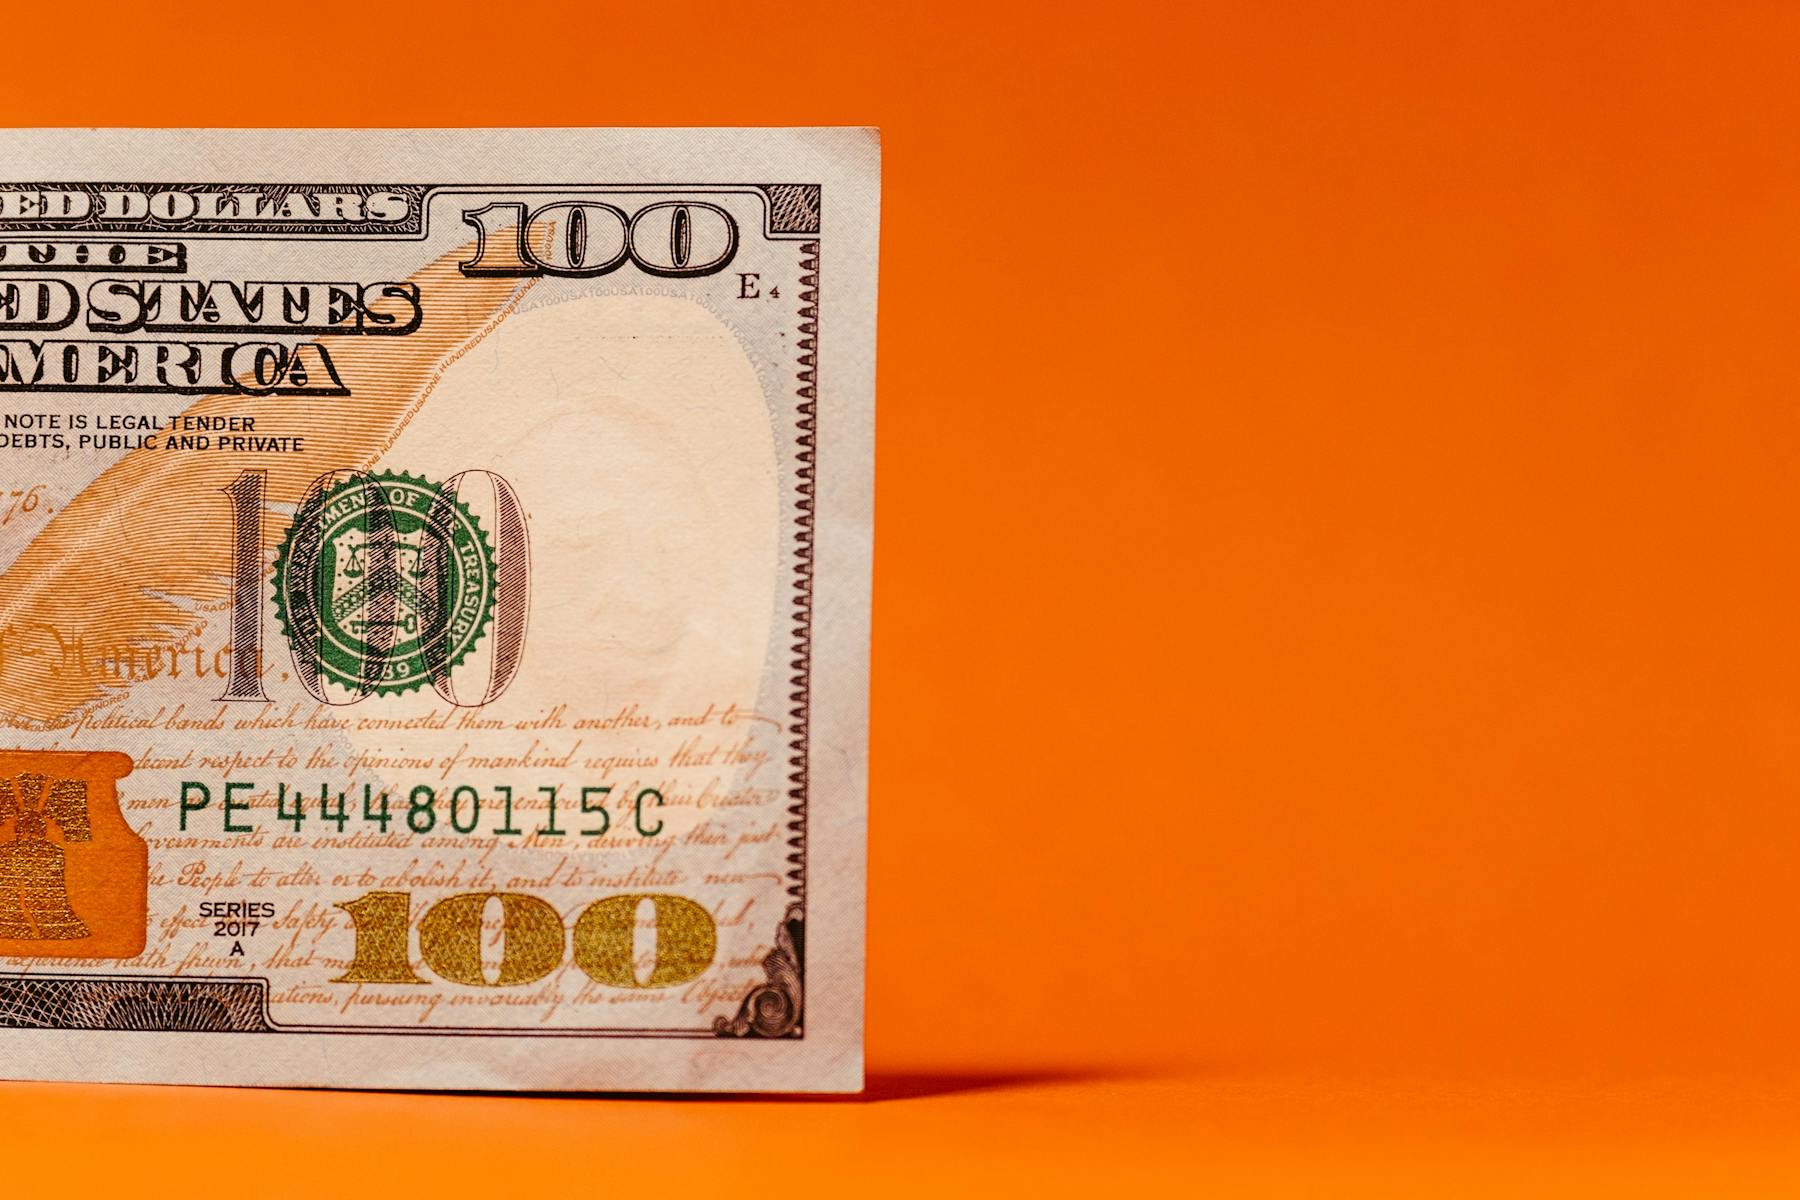 A one hundred dollar bill on an orange background